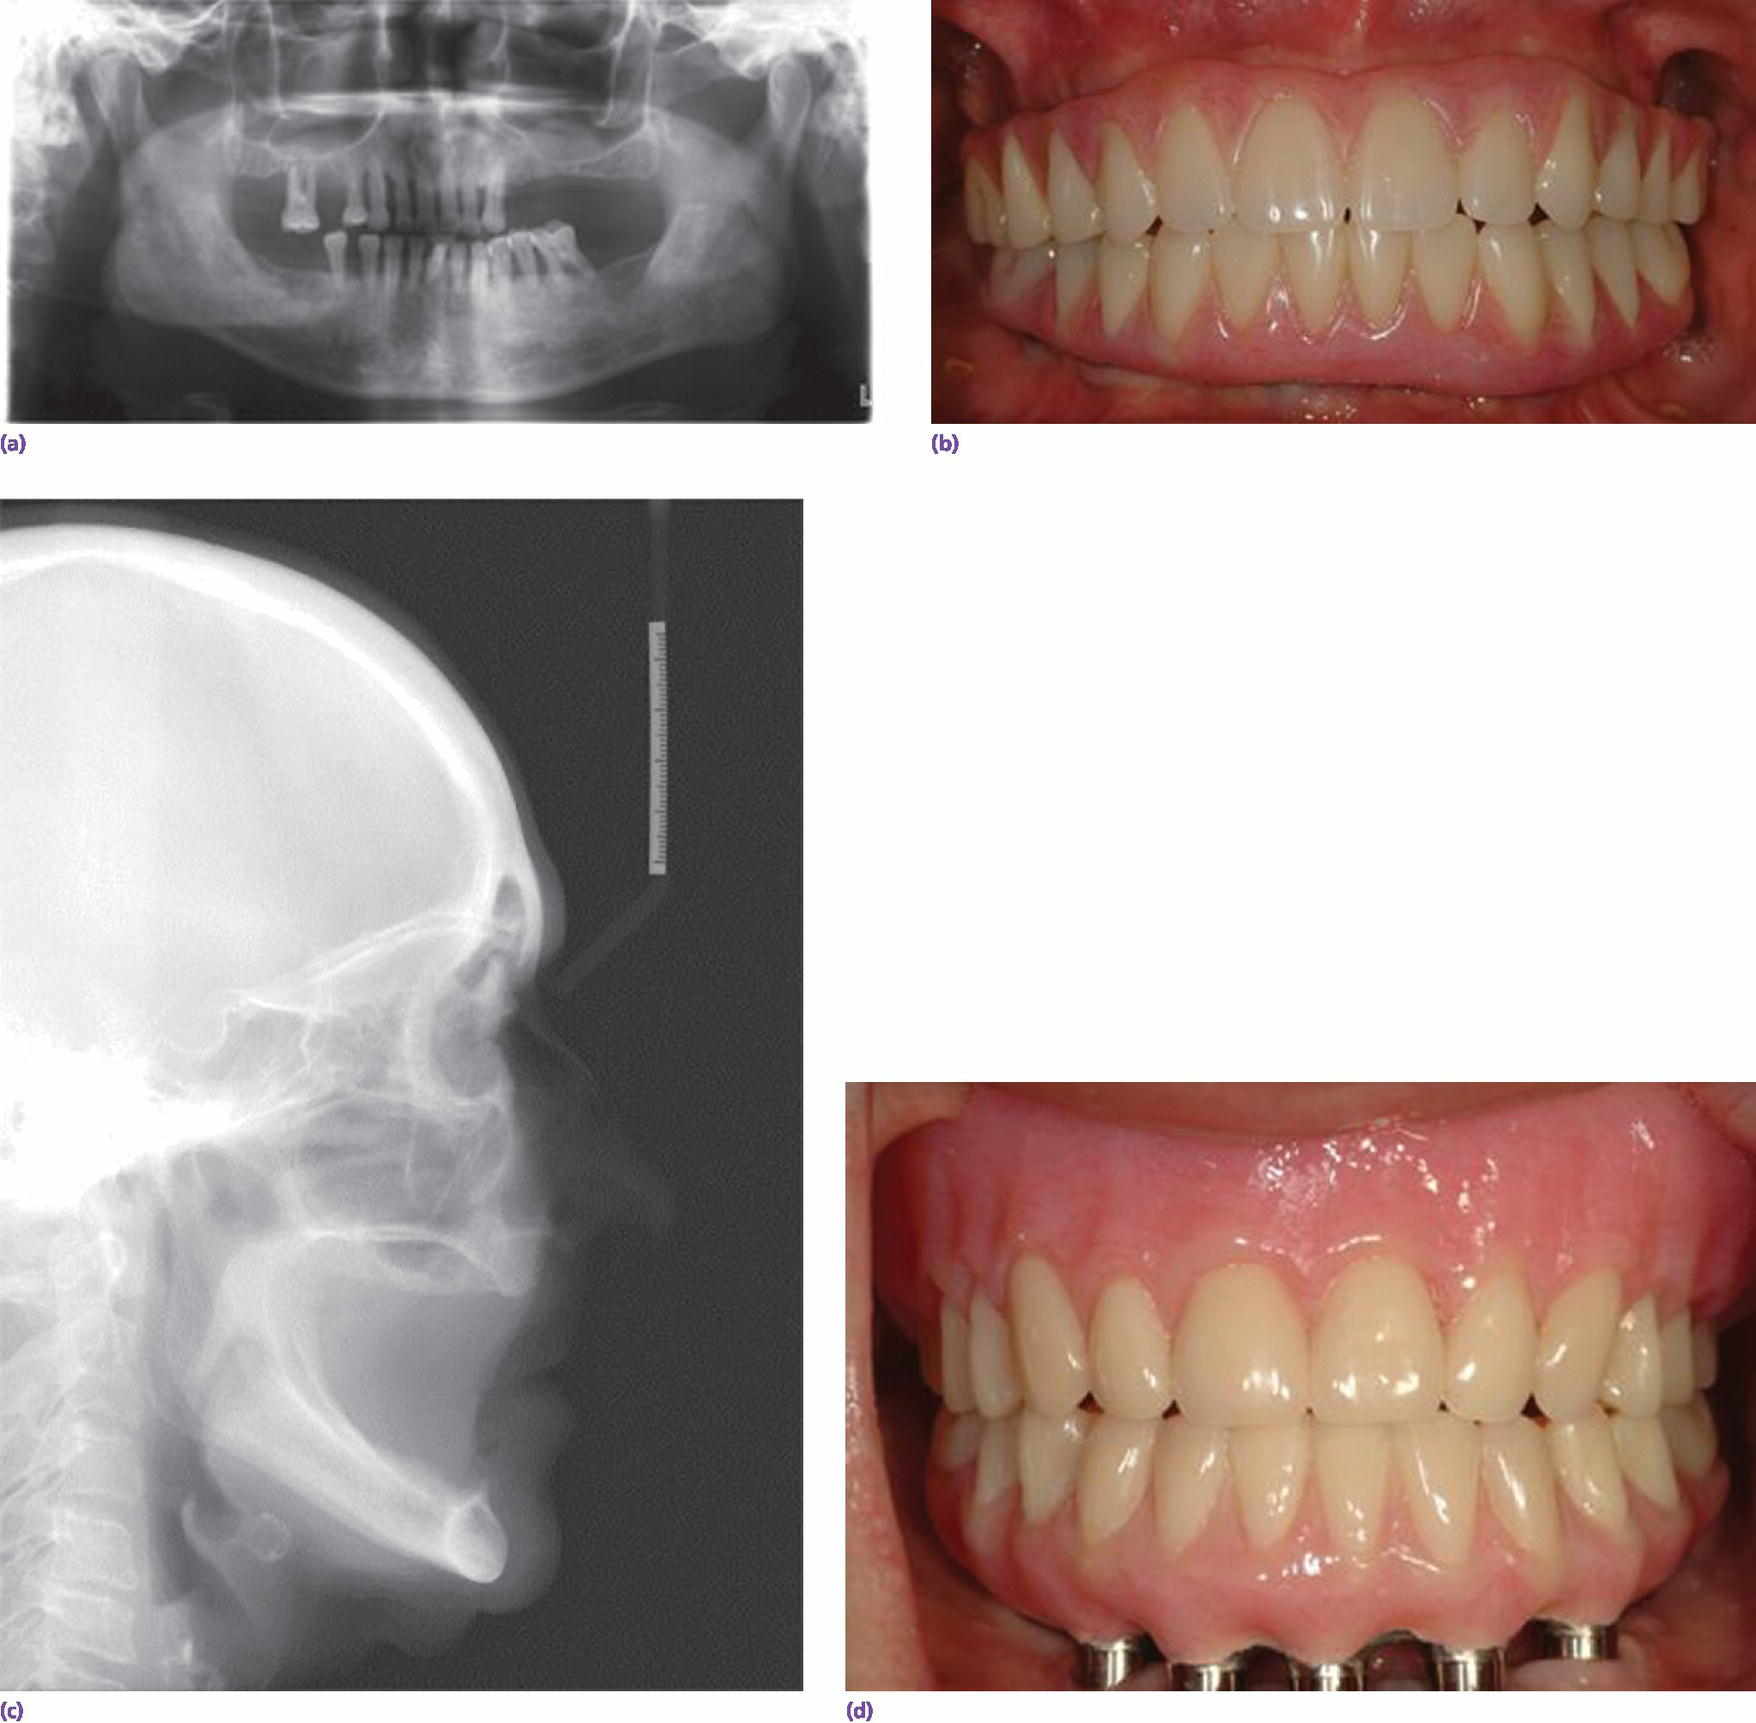 Radiographs of implant prosthetic reconstruction months (top left) and decades after tooth loss (bottom). Photos of implant fixed reconstruction (top right) and mandibular implant fixed reconstruction (bottom).